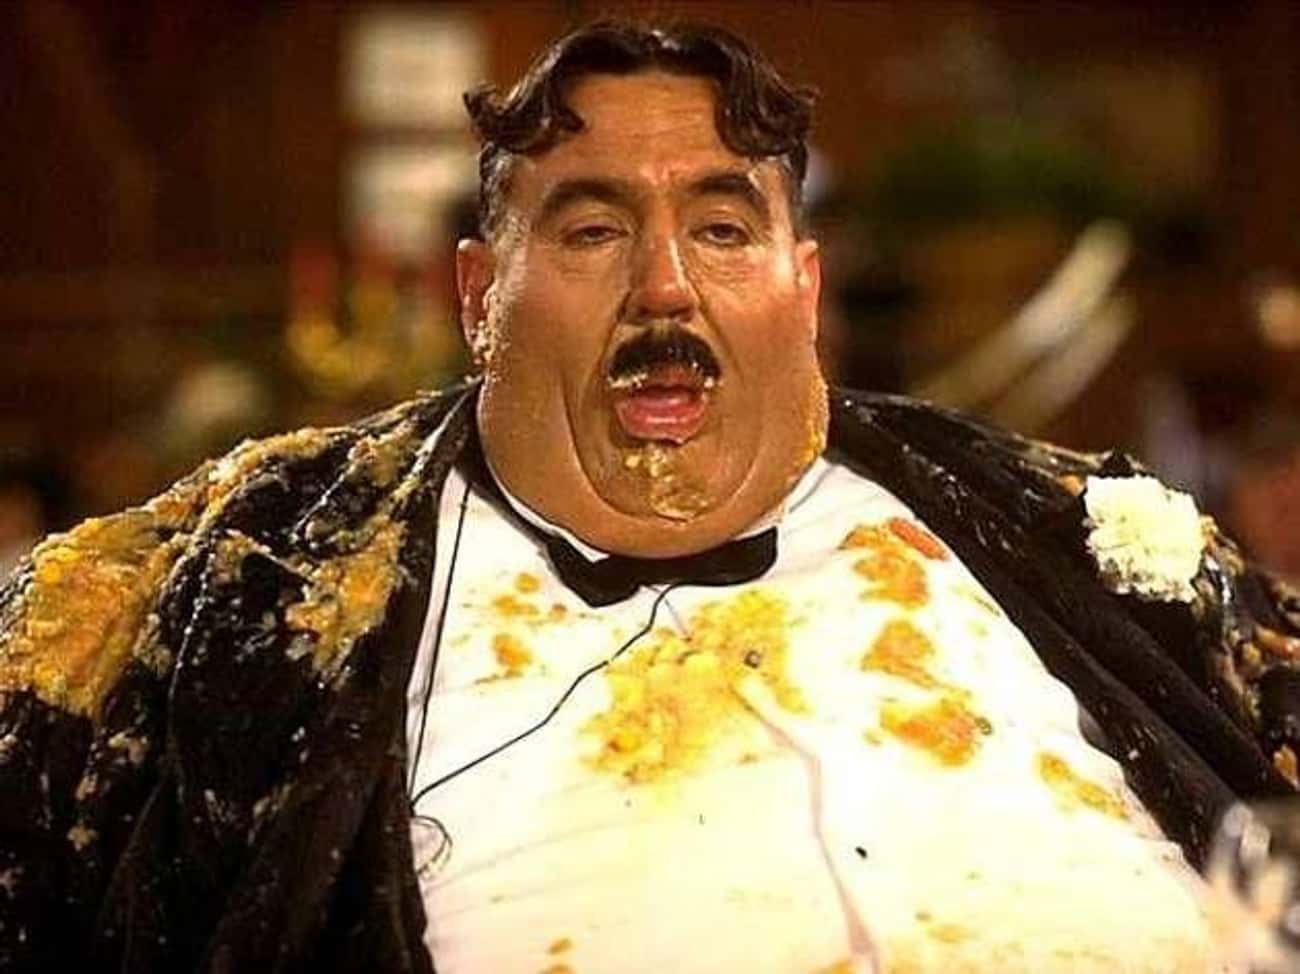 The Mr. Creosote Scene In 'Monty Python's The Meaning of Life'